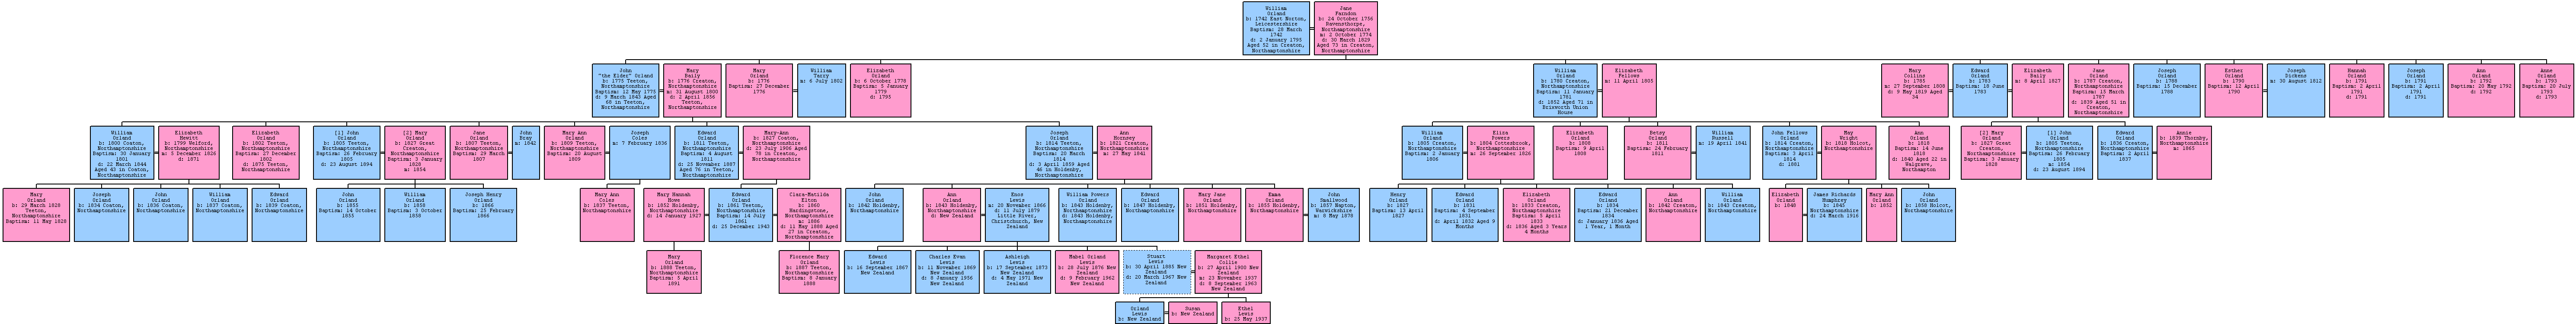 Family Tree of the Orland family from Creaton